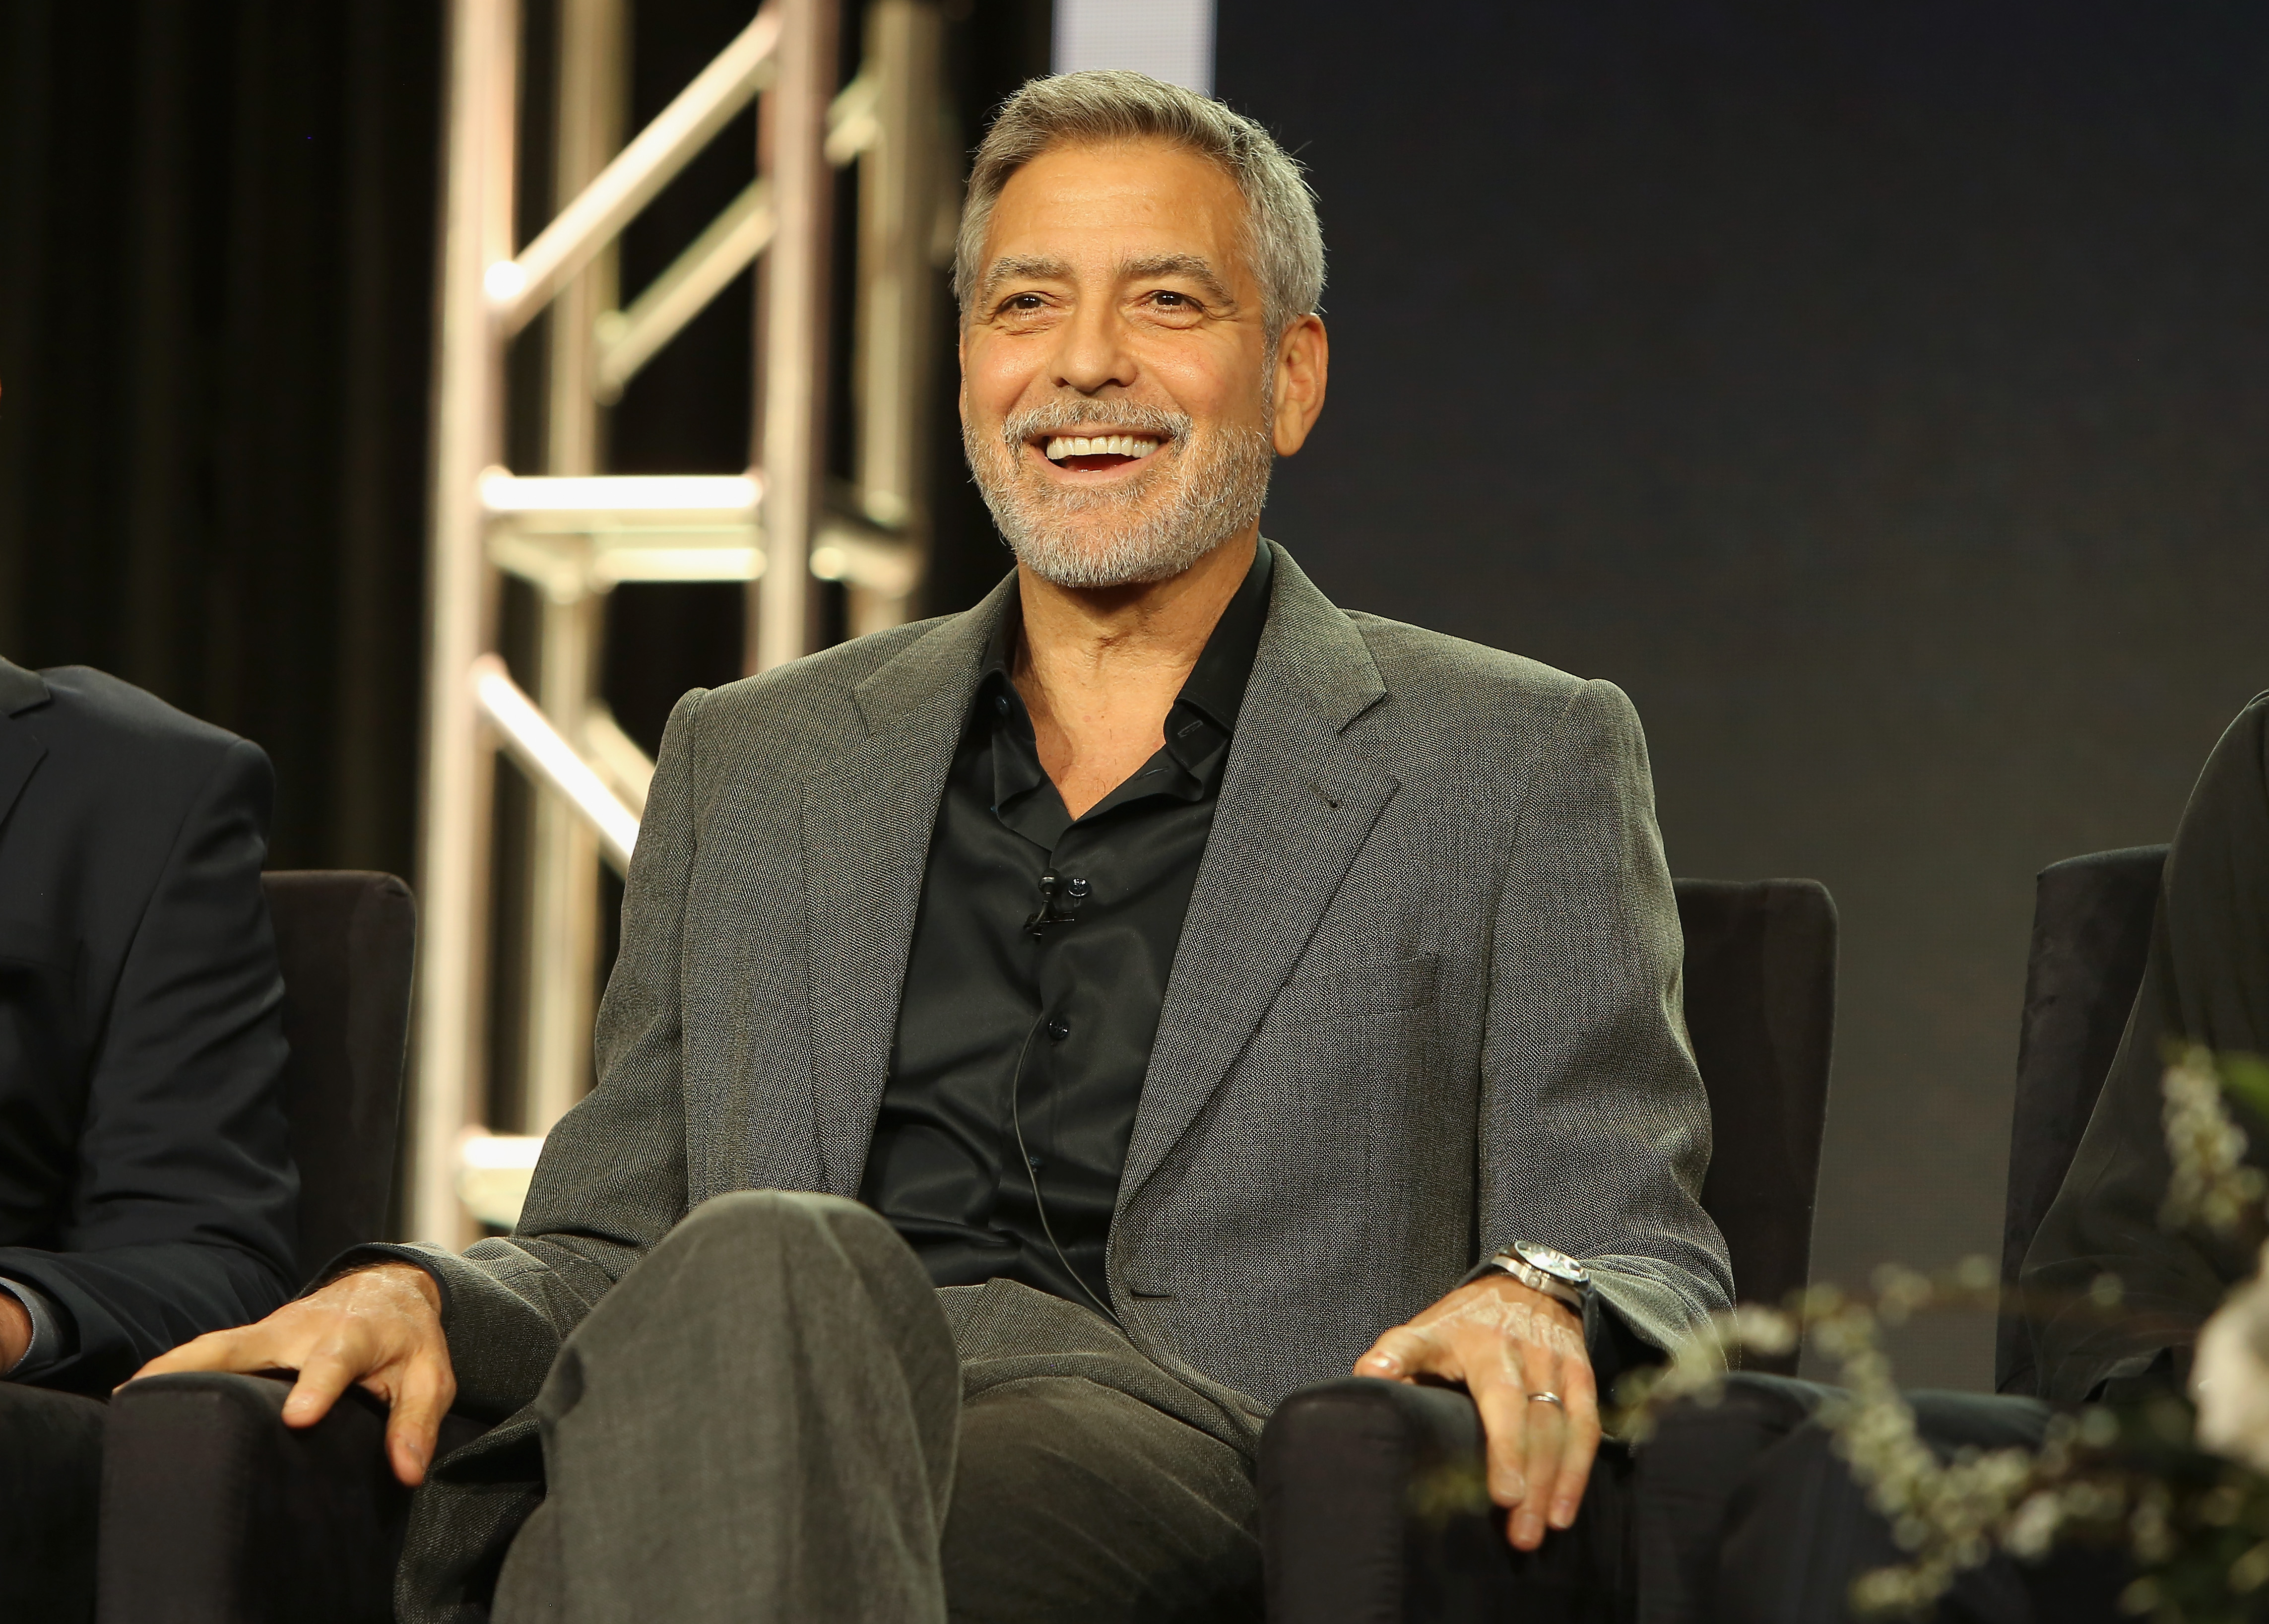 George Clooney of 'Catch 22' speaking onstage during the Hulu Panel on February 11, 2019, in Pasadena, California | Source: Getty Images